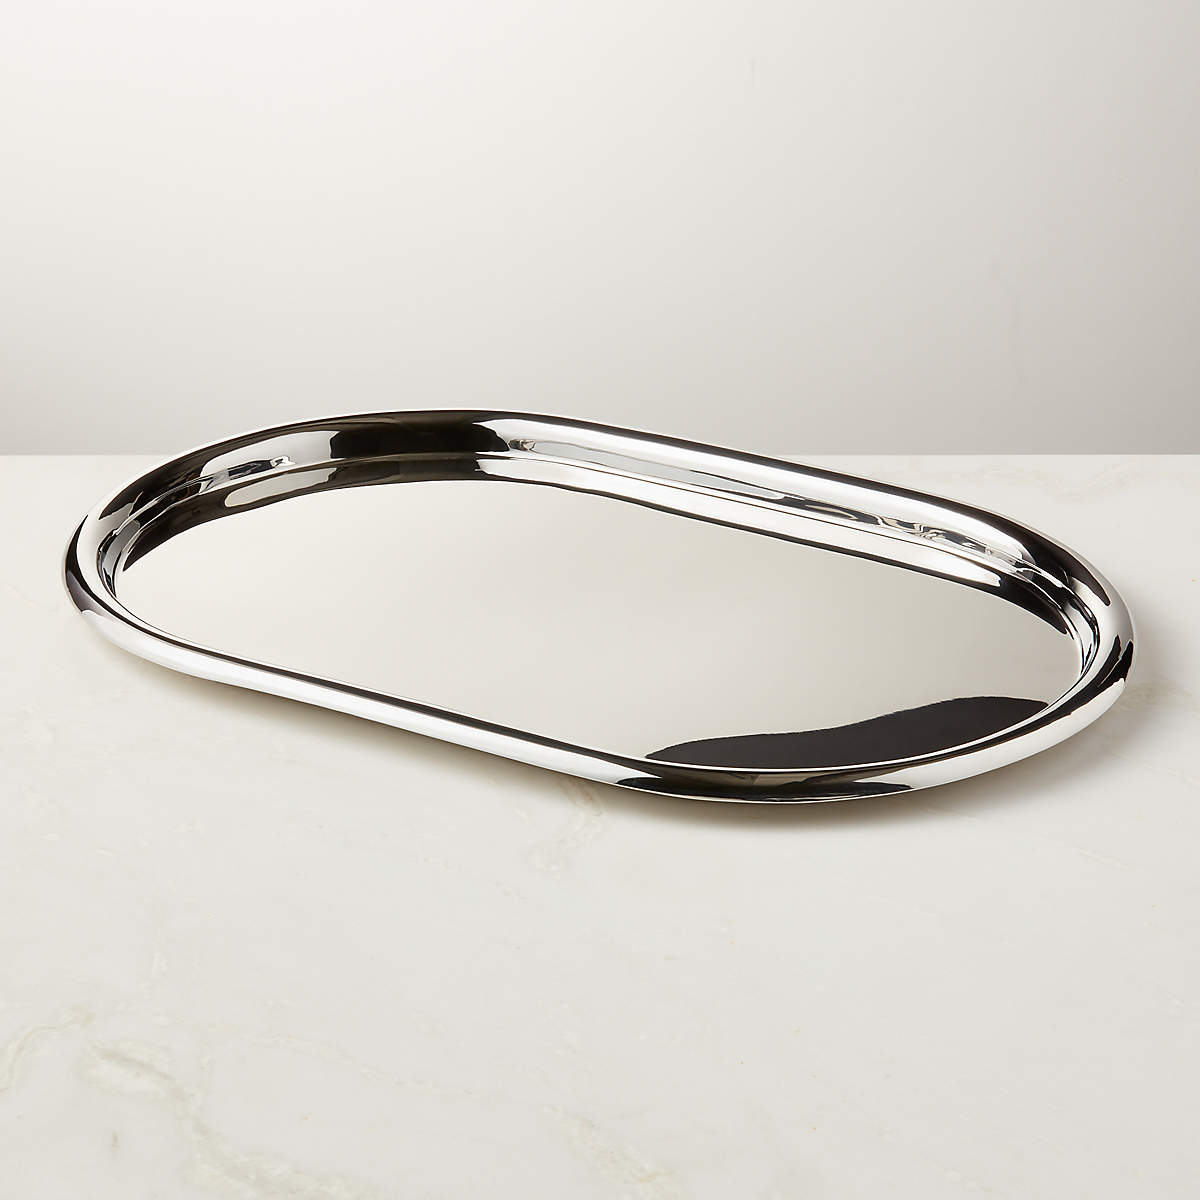 piero-oval-polished-stainless-steel-serving-tray.jpg